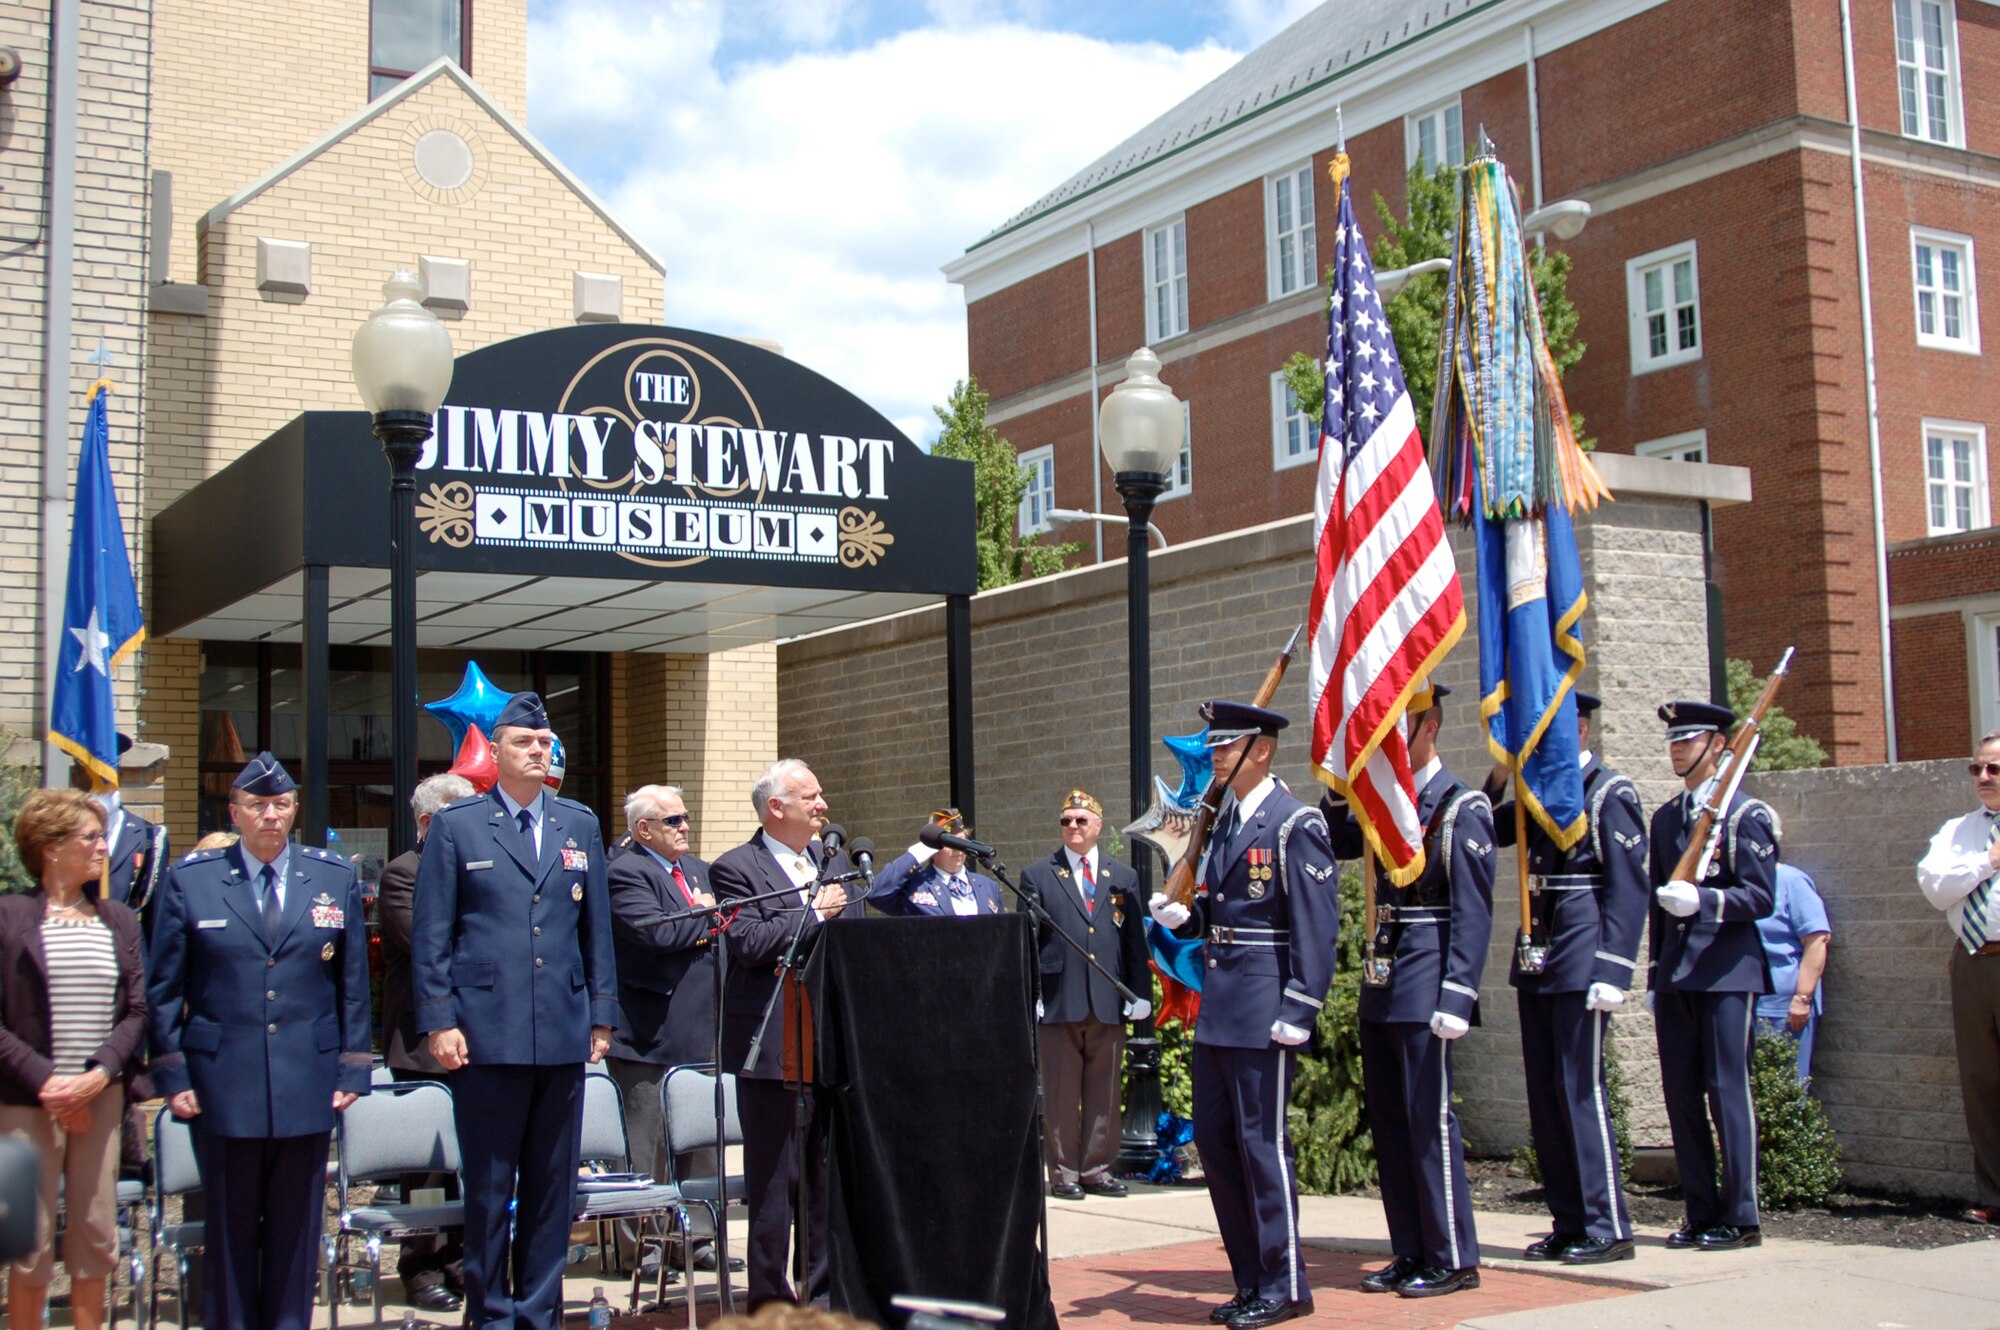 From left, Maj. Gen. Charles E. Stenner Jr., assistant deputy chief of staff for Strategic Plans and Programs, Headquarters U.S. Air Force, representing the Air Force Reserve Command and Col. Terry L. Ross, 11th Wing vice commander, Bolling Air Force Base, D.C., attend a ceremony celebrating Jimmie Stewart's centennial in Indiana, Pa., May 24, 2008. (U.S. Air Force photo/Lt. Col. Lori Largen)